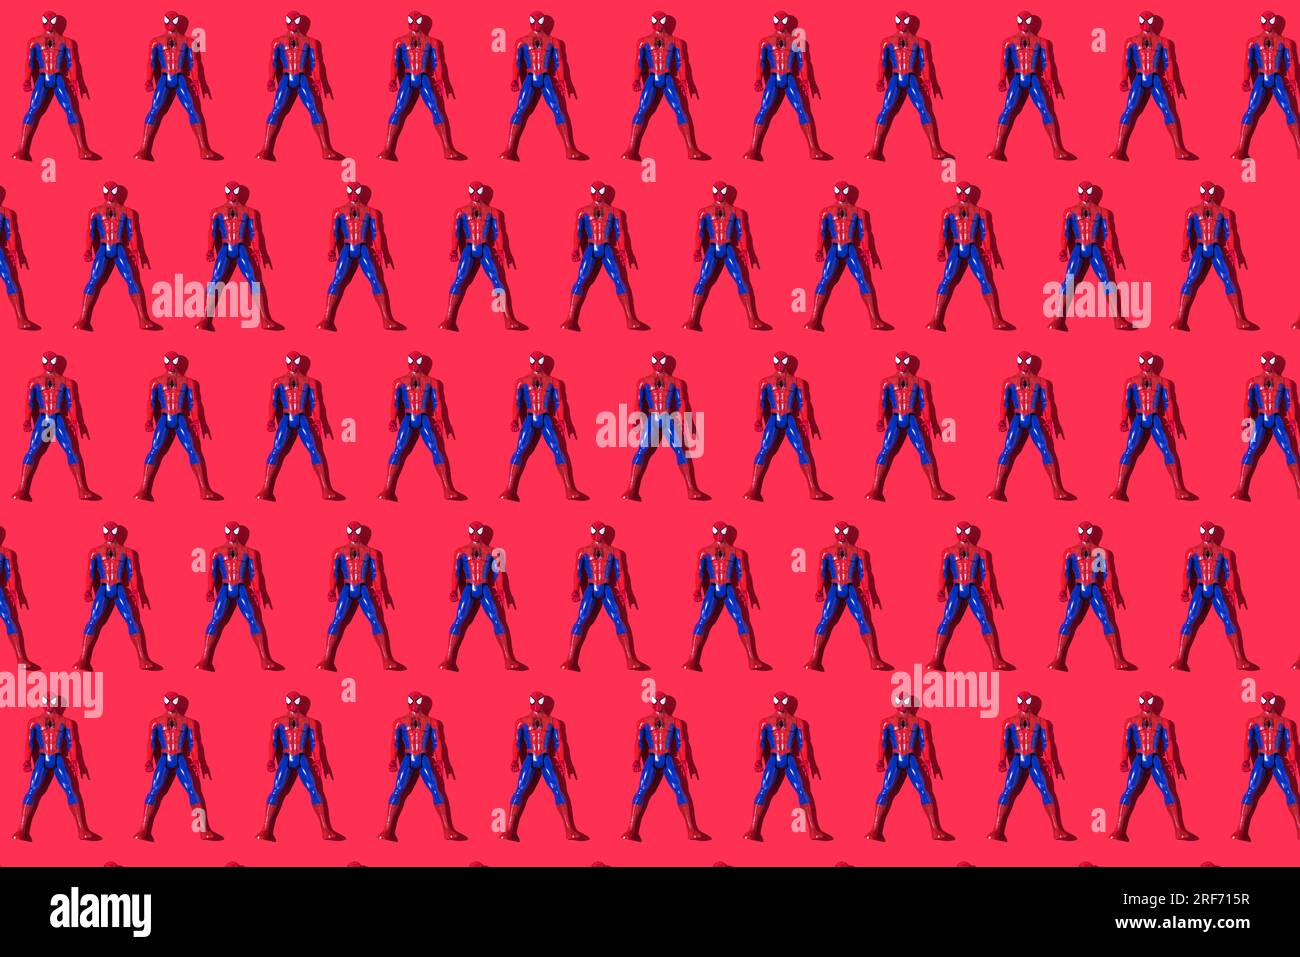 Pattern of Marvel and Sony spiderman dolls on a red background. Comic, superhero, spider, spider-man, mask and editorial concept. Stock Photo